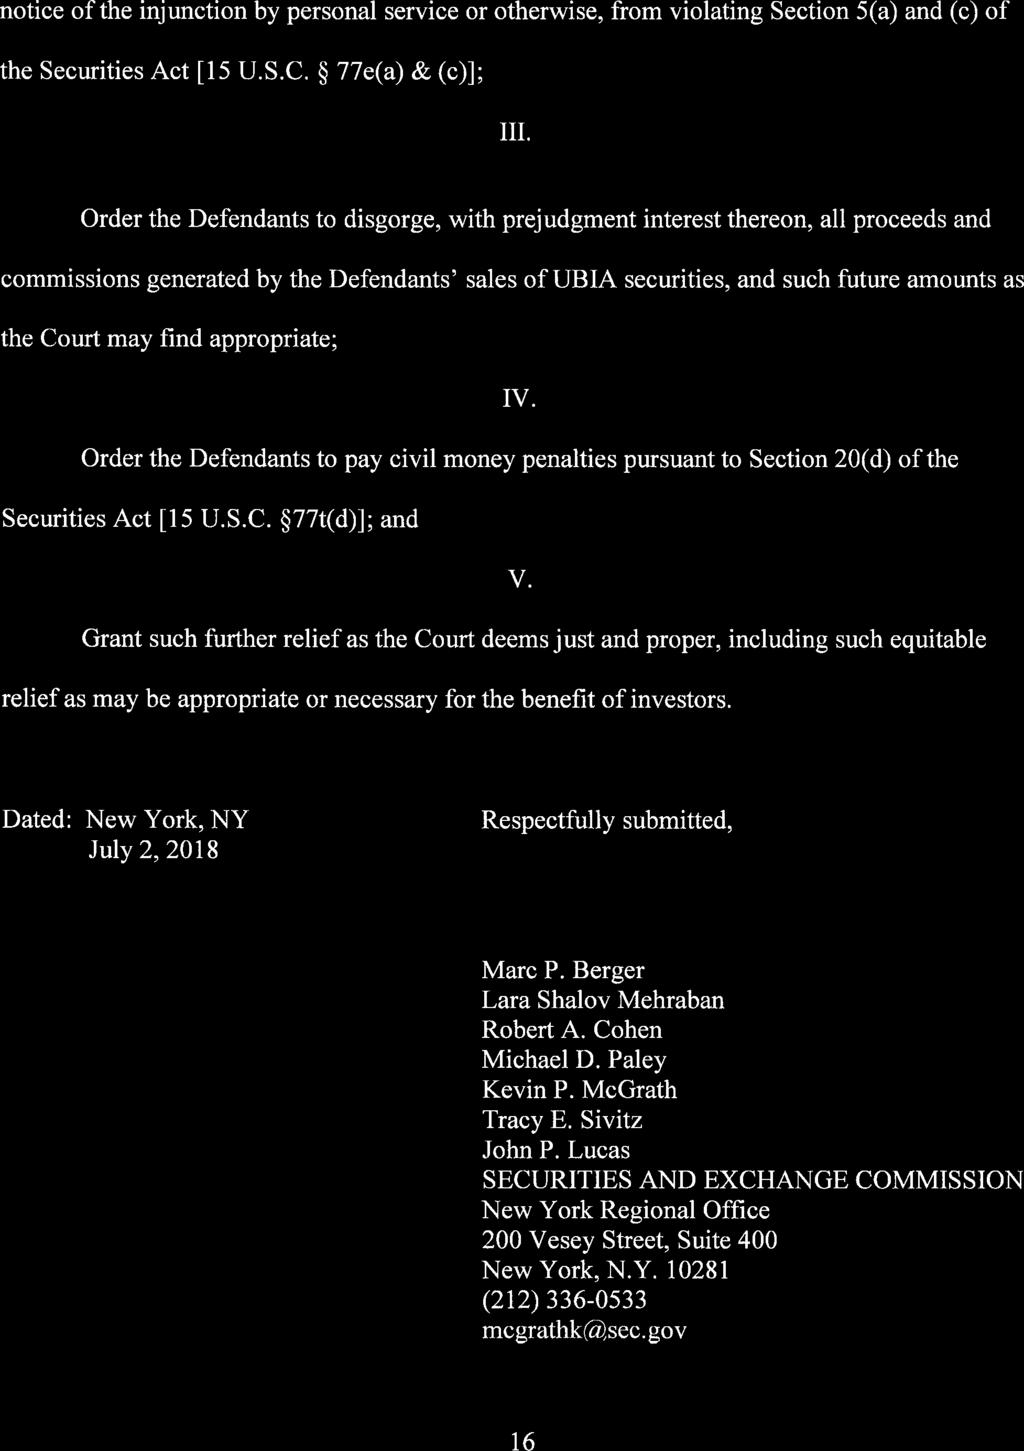 Case 1:18-cv-05980 Document 1 Filed 07/02/18 Page 16 of 16 notice of the injunction by personal service or otherwise, from violating Section 5(a) and (c) of the Securities Act [15 U.S.C. 77e(a) & (c)]; III.